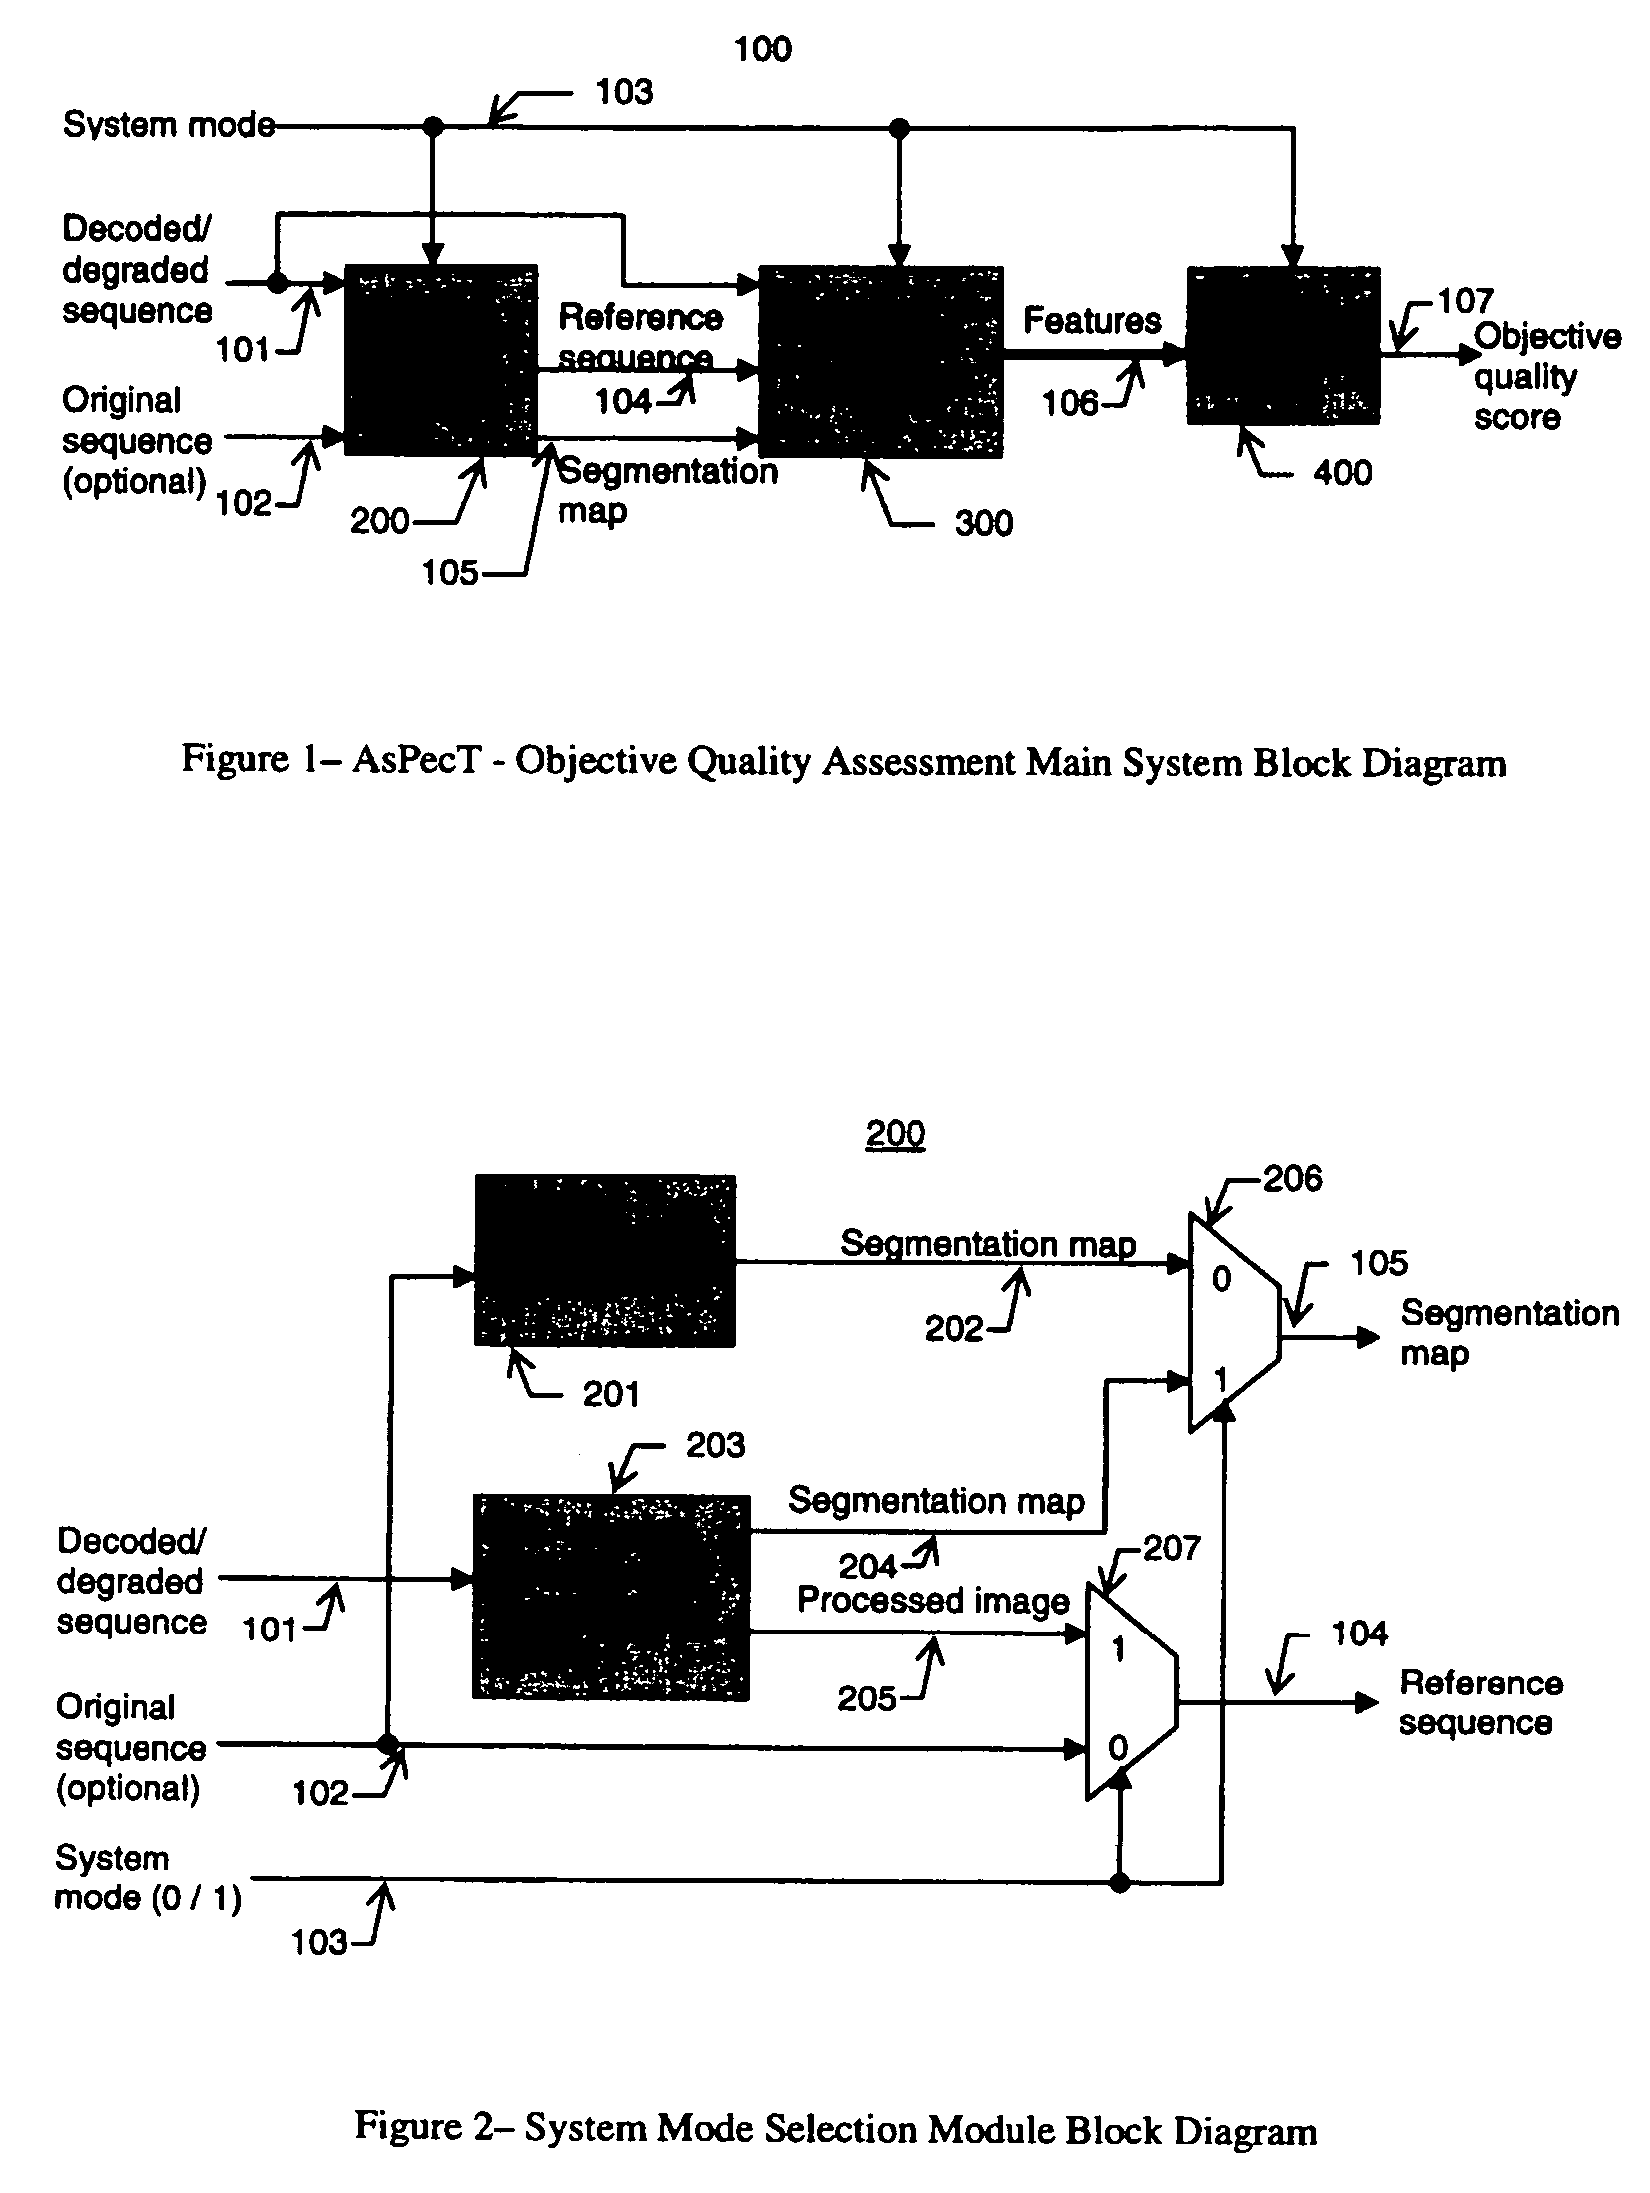 Apparatus and method for objective assessment of DCT-coded video quality with or without an original video sequence